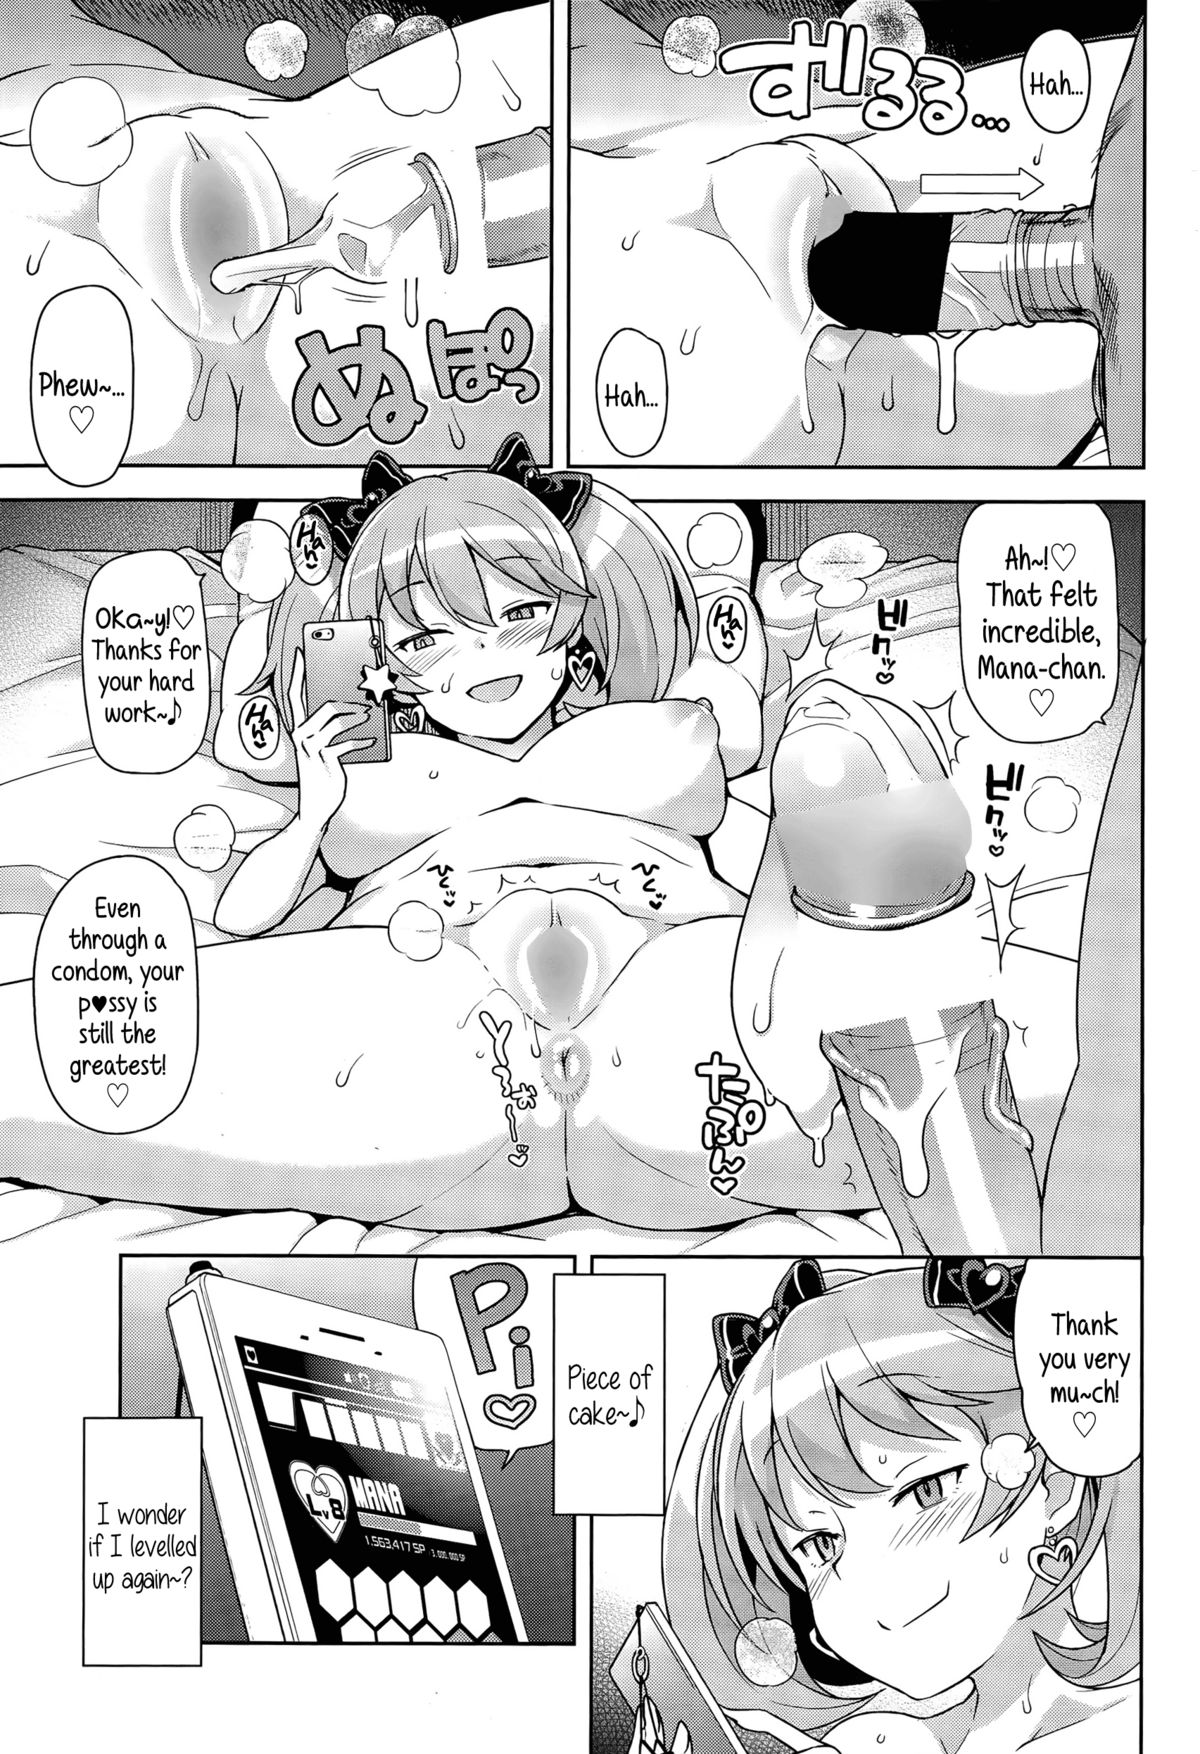 [Tamagoro] Hametomo Collection Ch. 1-2 | FuckBuddy Collection Ch. 1-2 [English] {5 a.m.} page 3 full